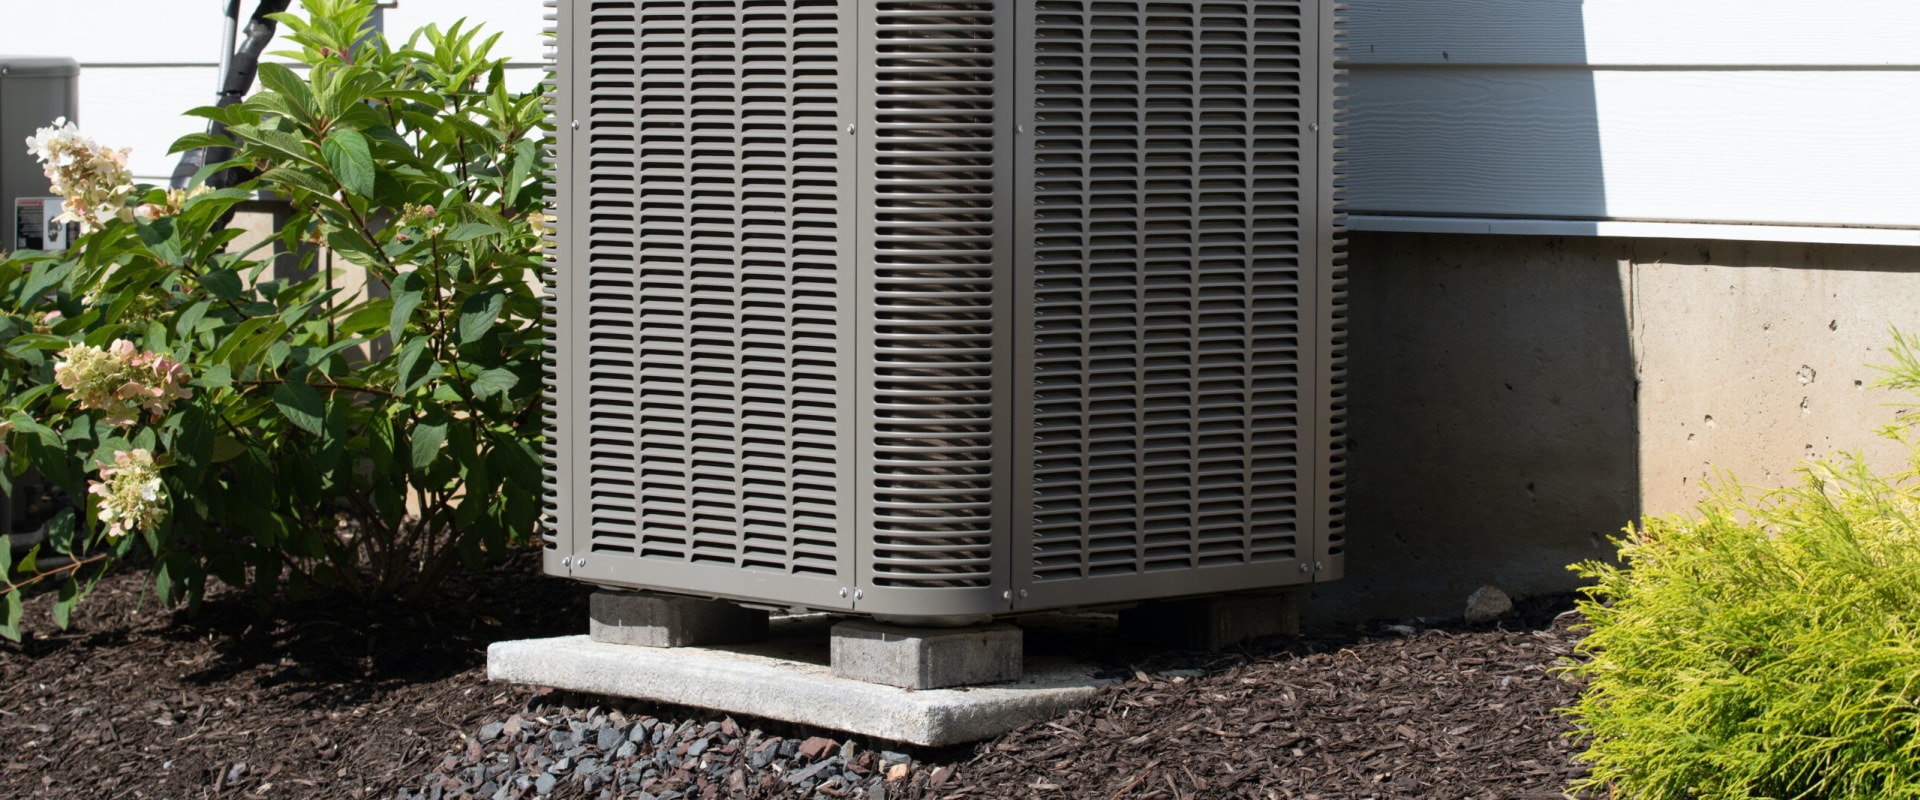 What is the least expensive way to air condition home?